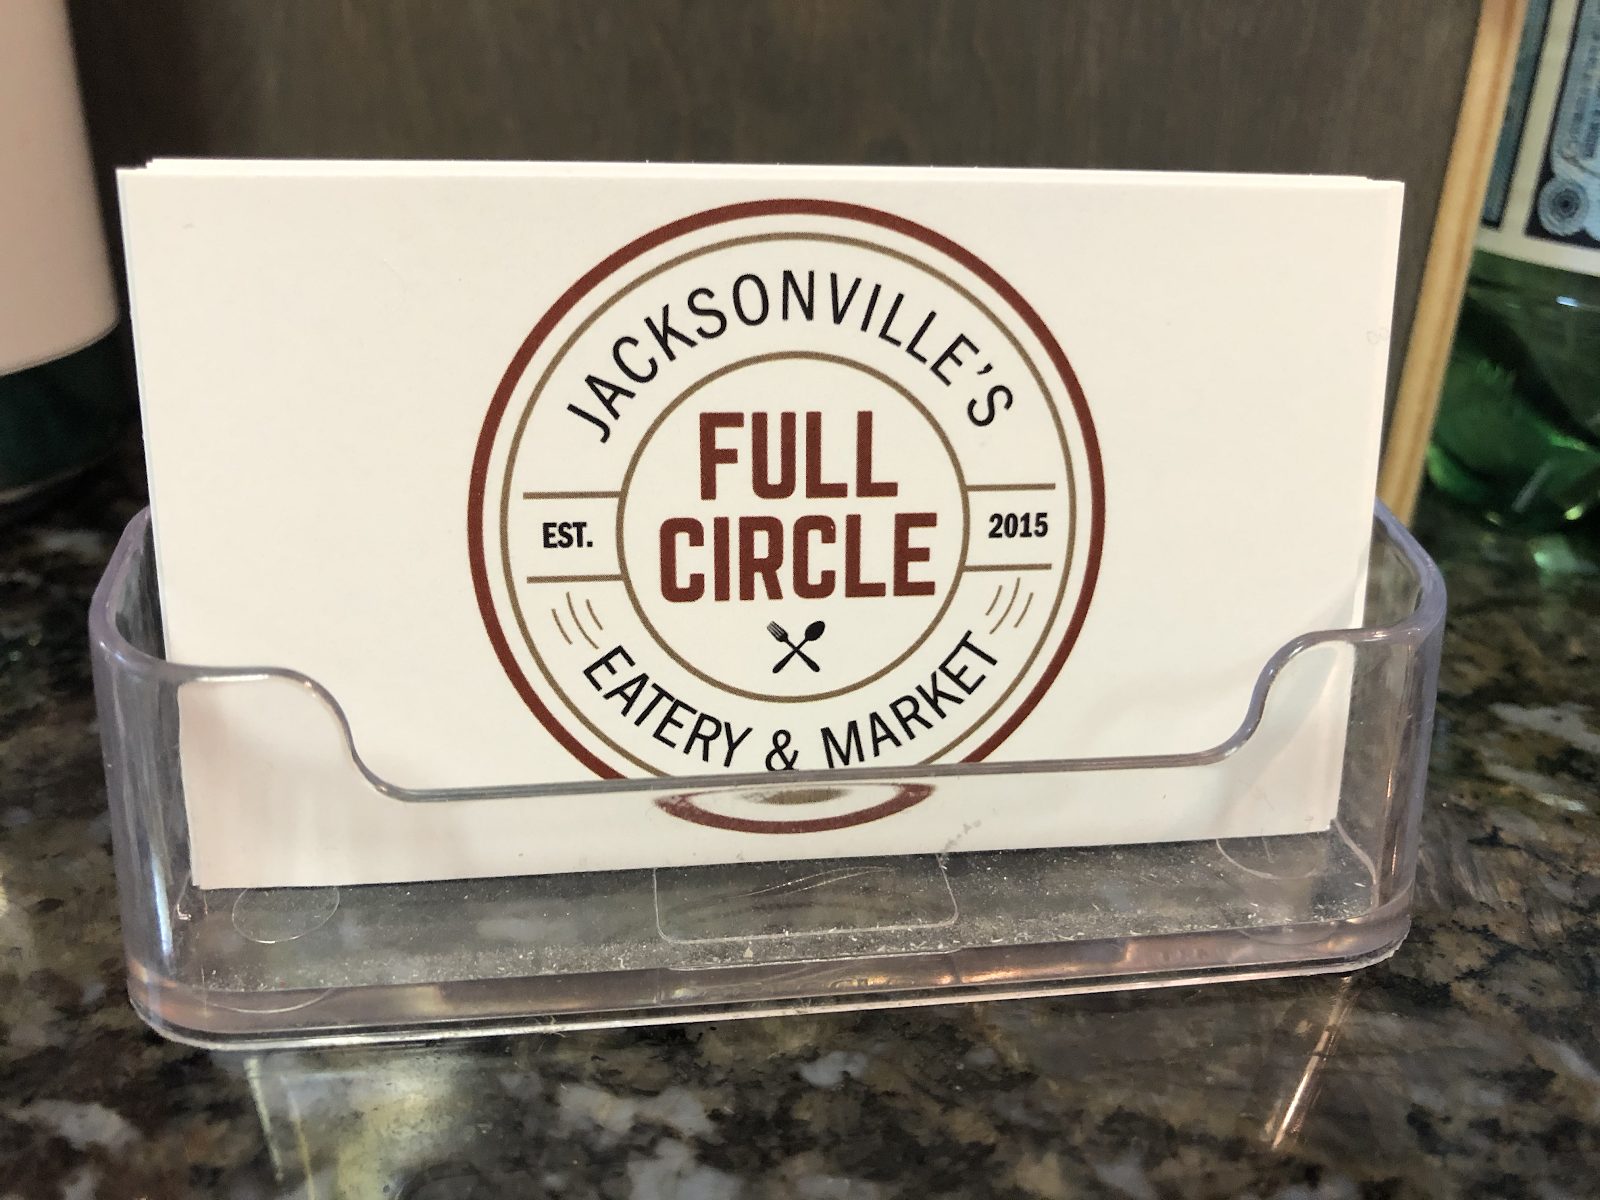 full circle business card featuring their logo that reads Jacksonville's Full Circle Eatery & Market, Established 2015